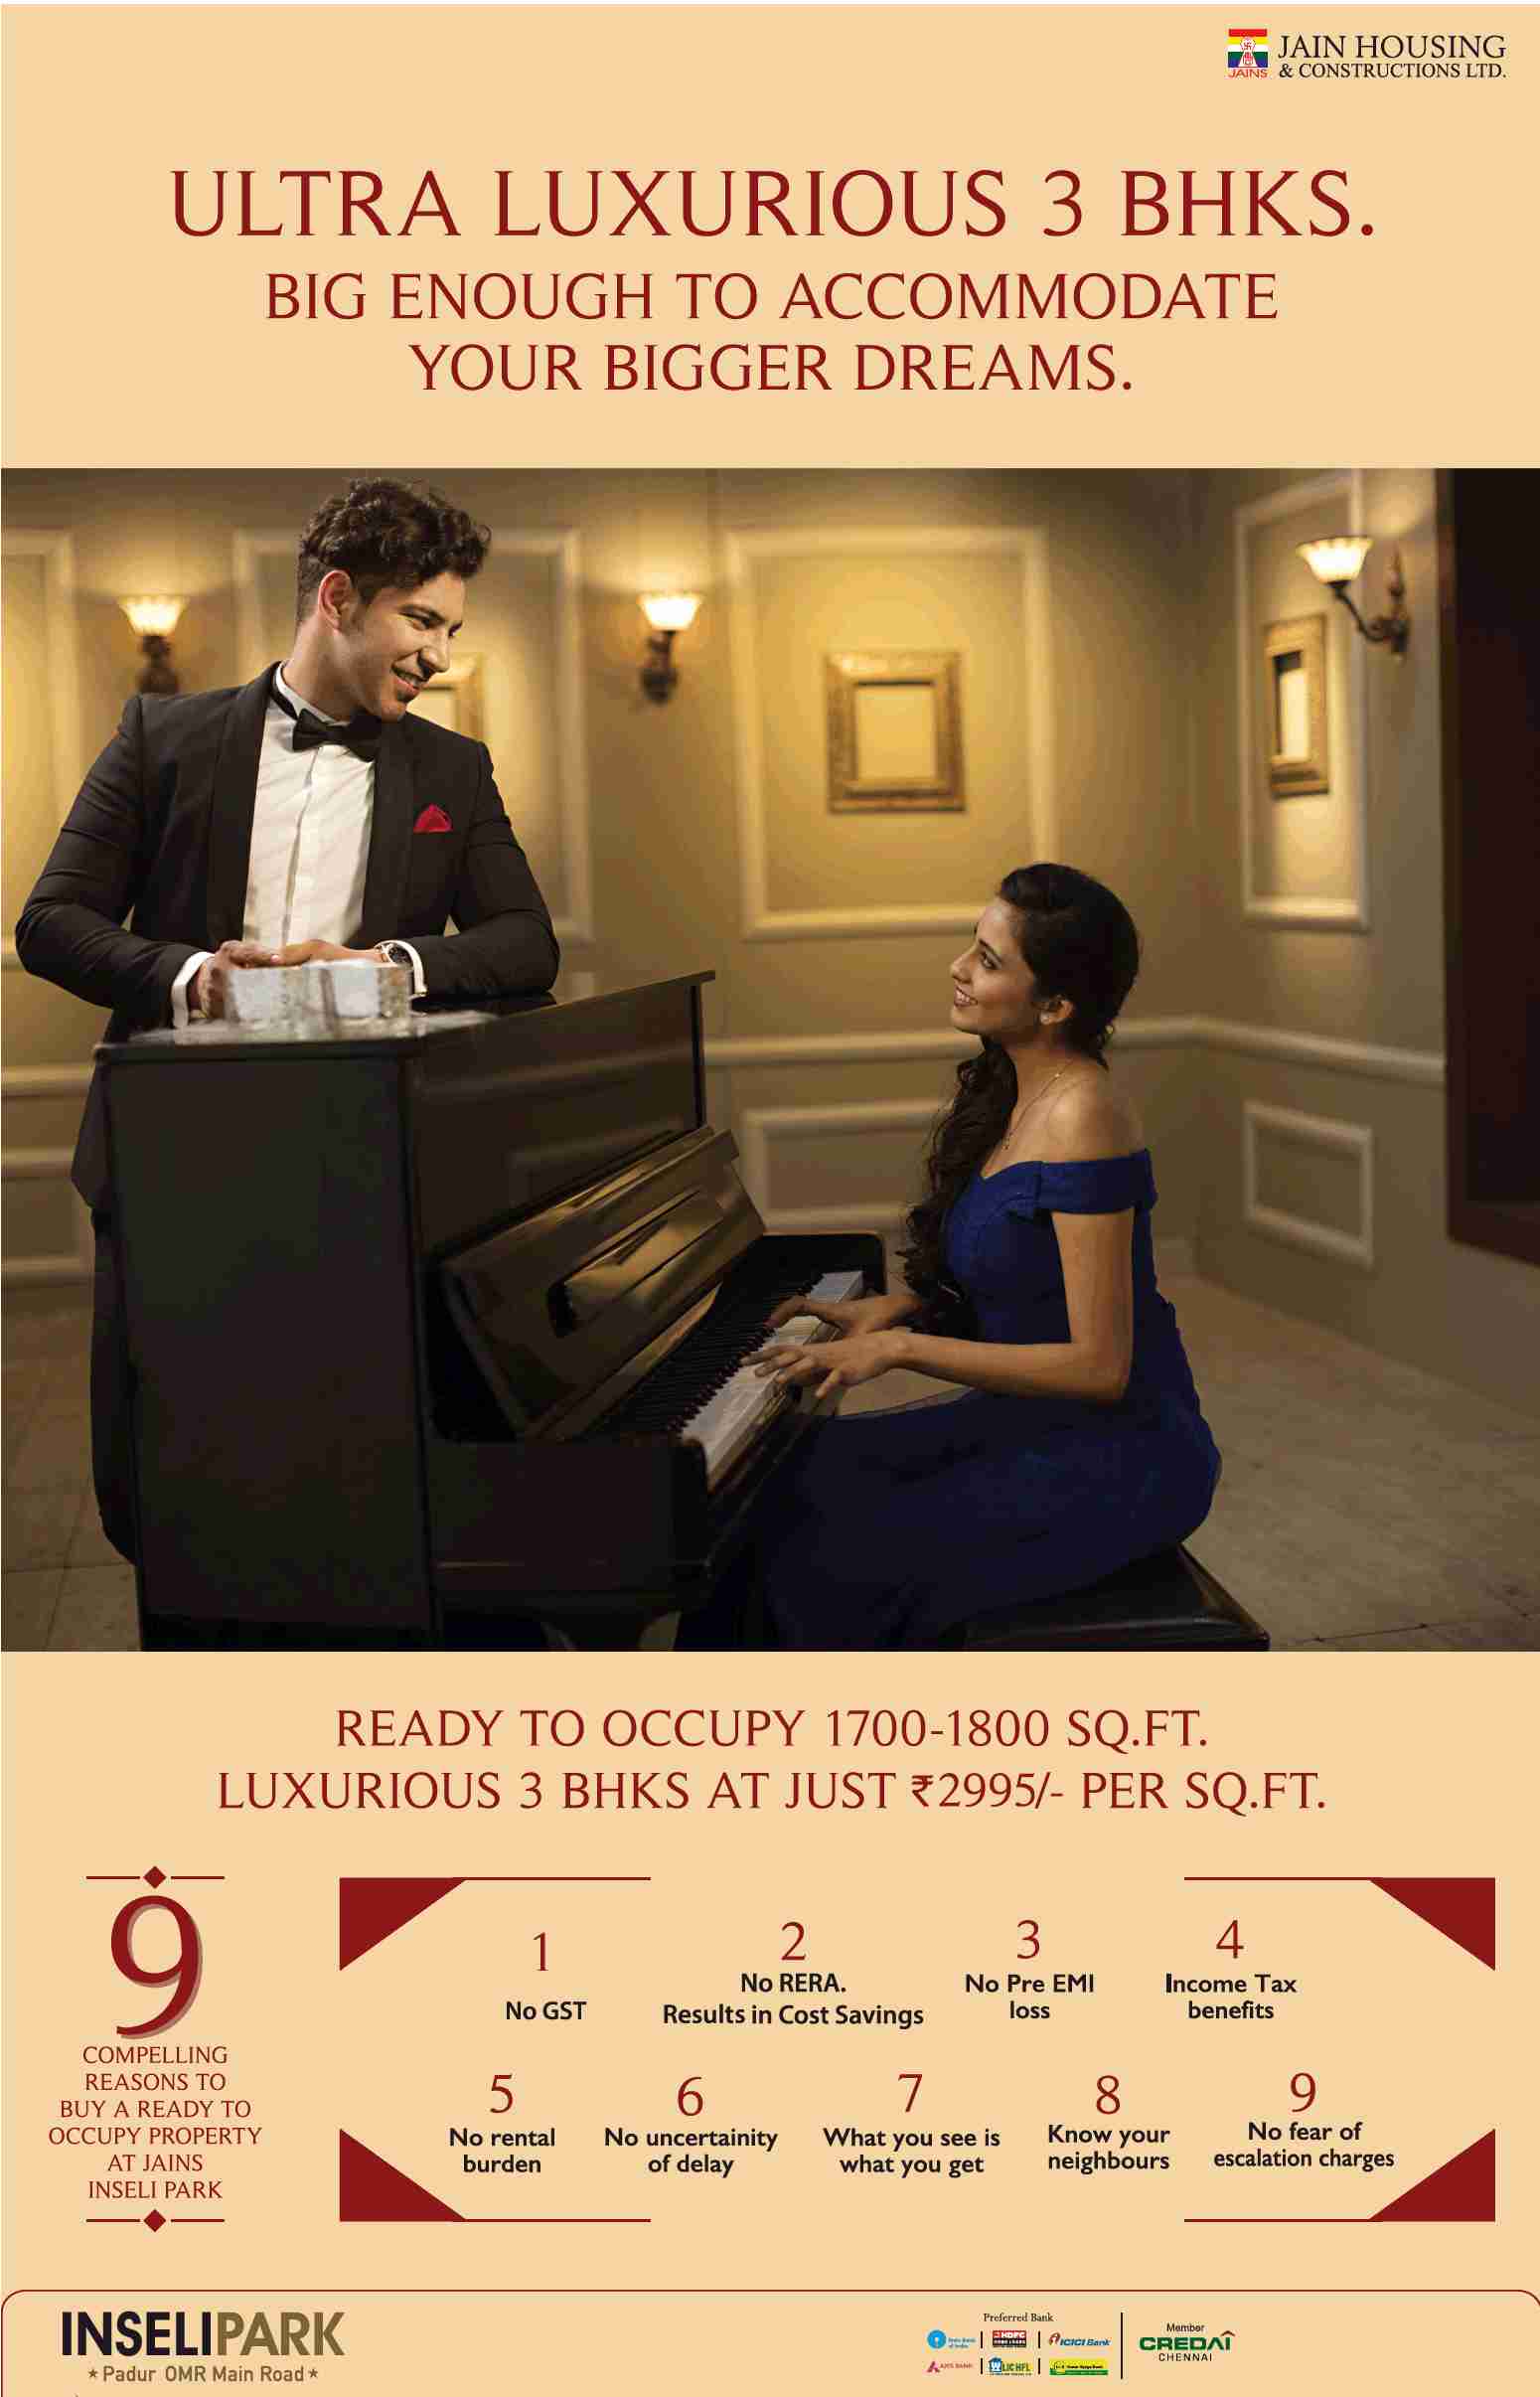 Book ready to occupy 3 BHK homes @ 2995 per sq.ft. at Jain Inseli Park in Chennai Update